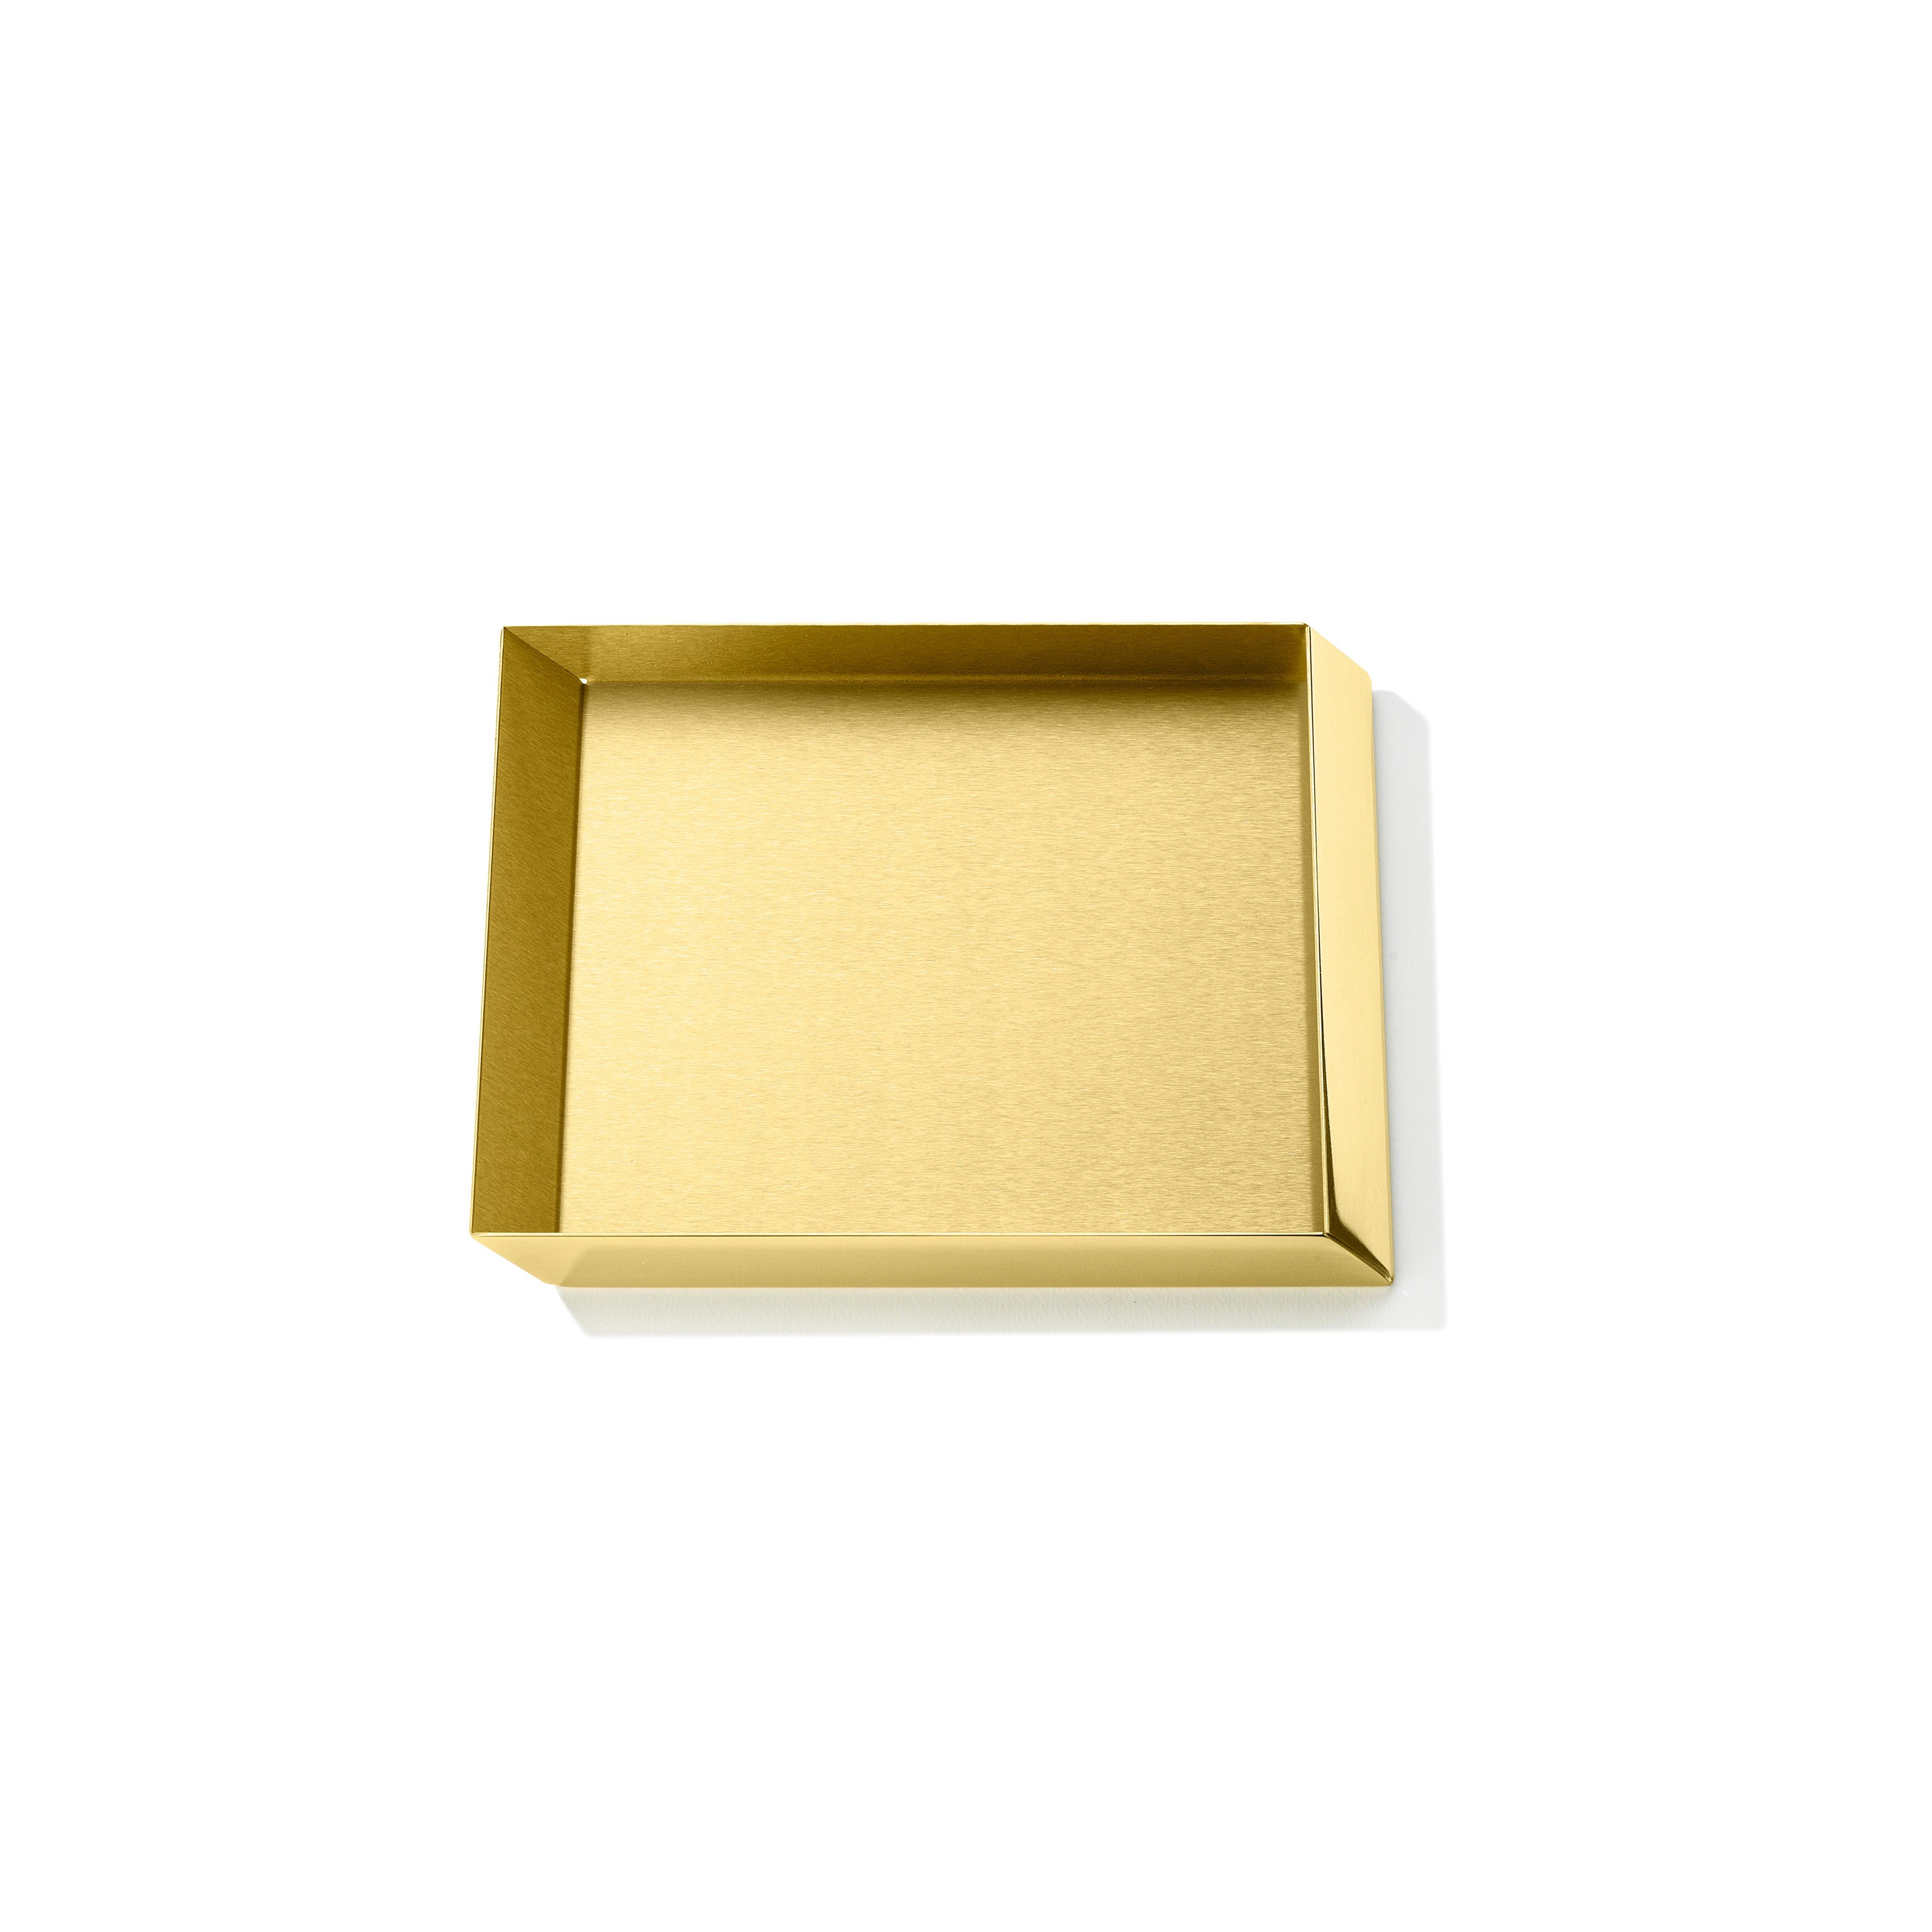 Axonometry squared small tray in brass by Elisa Giovanni.

Materials:
Brass
Net weight:
0.55 kg
Dimensions:
W 20 x D 20 x 2 H cm.